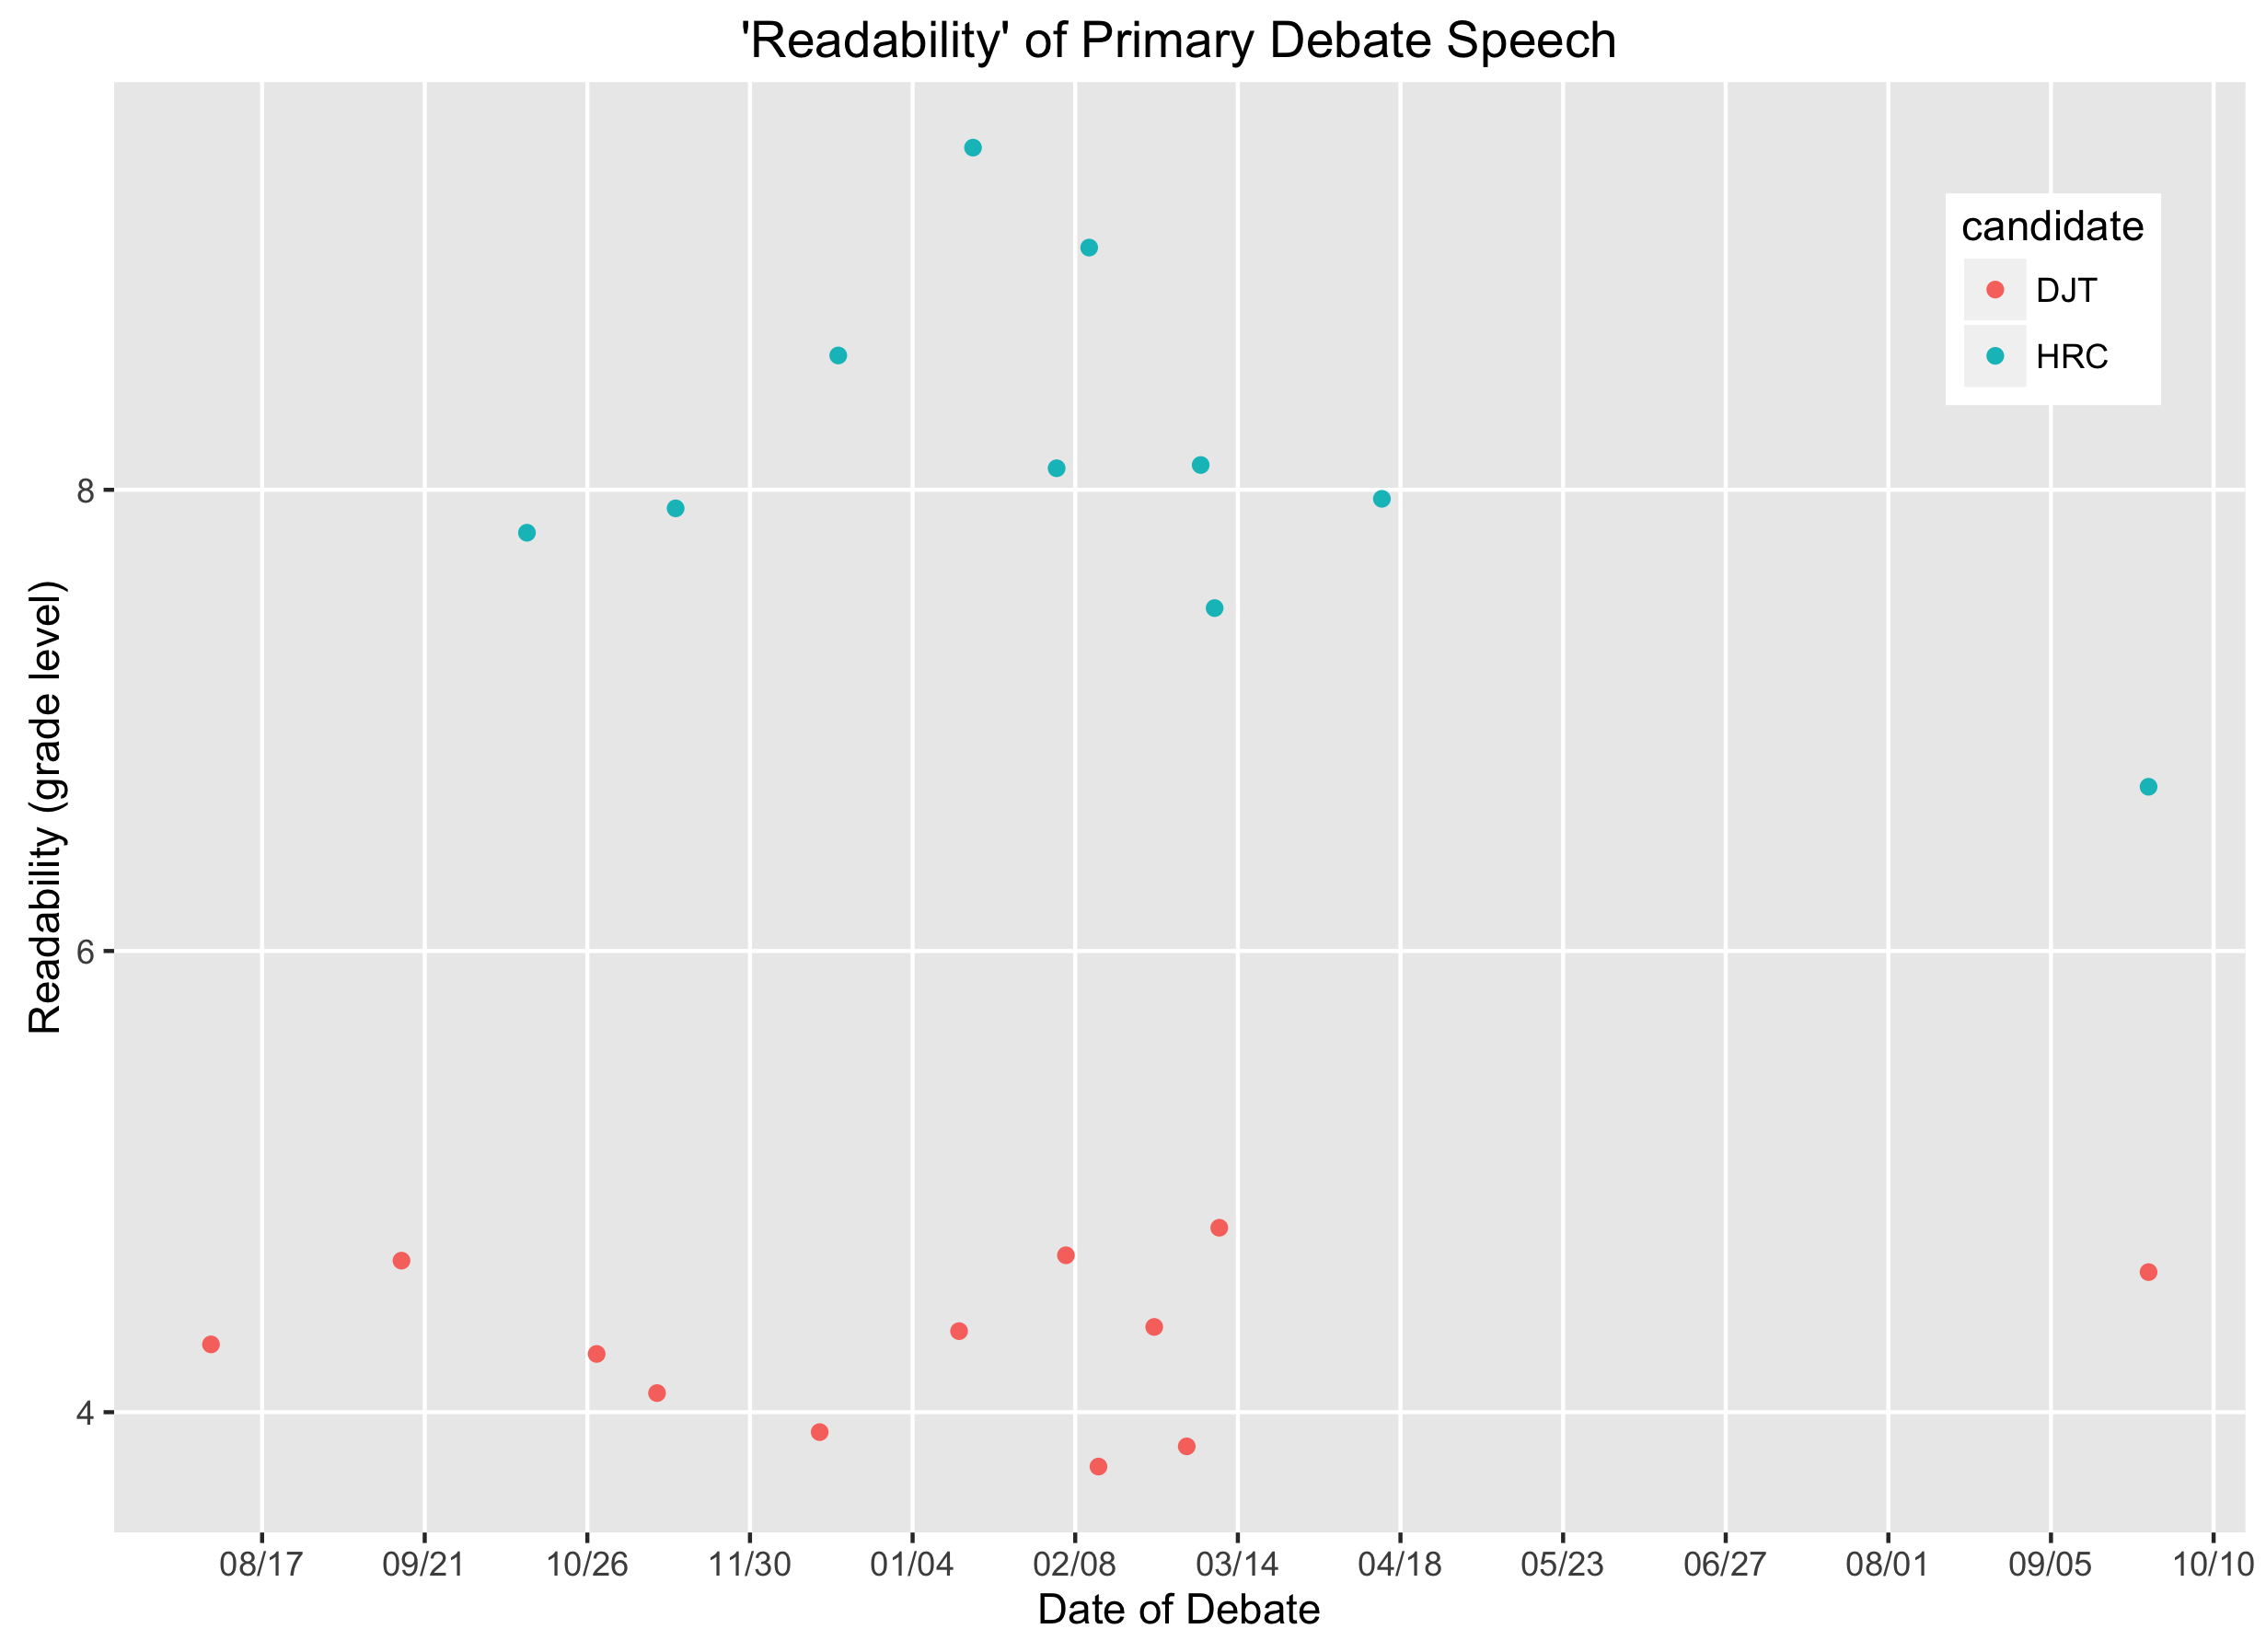 Scatterplot of readability versus date of debate, with dots colored by candidate.